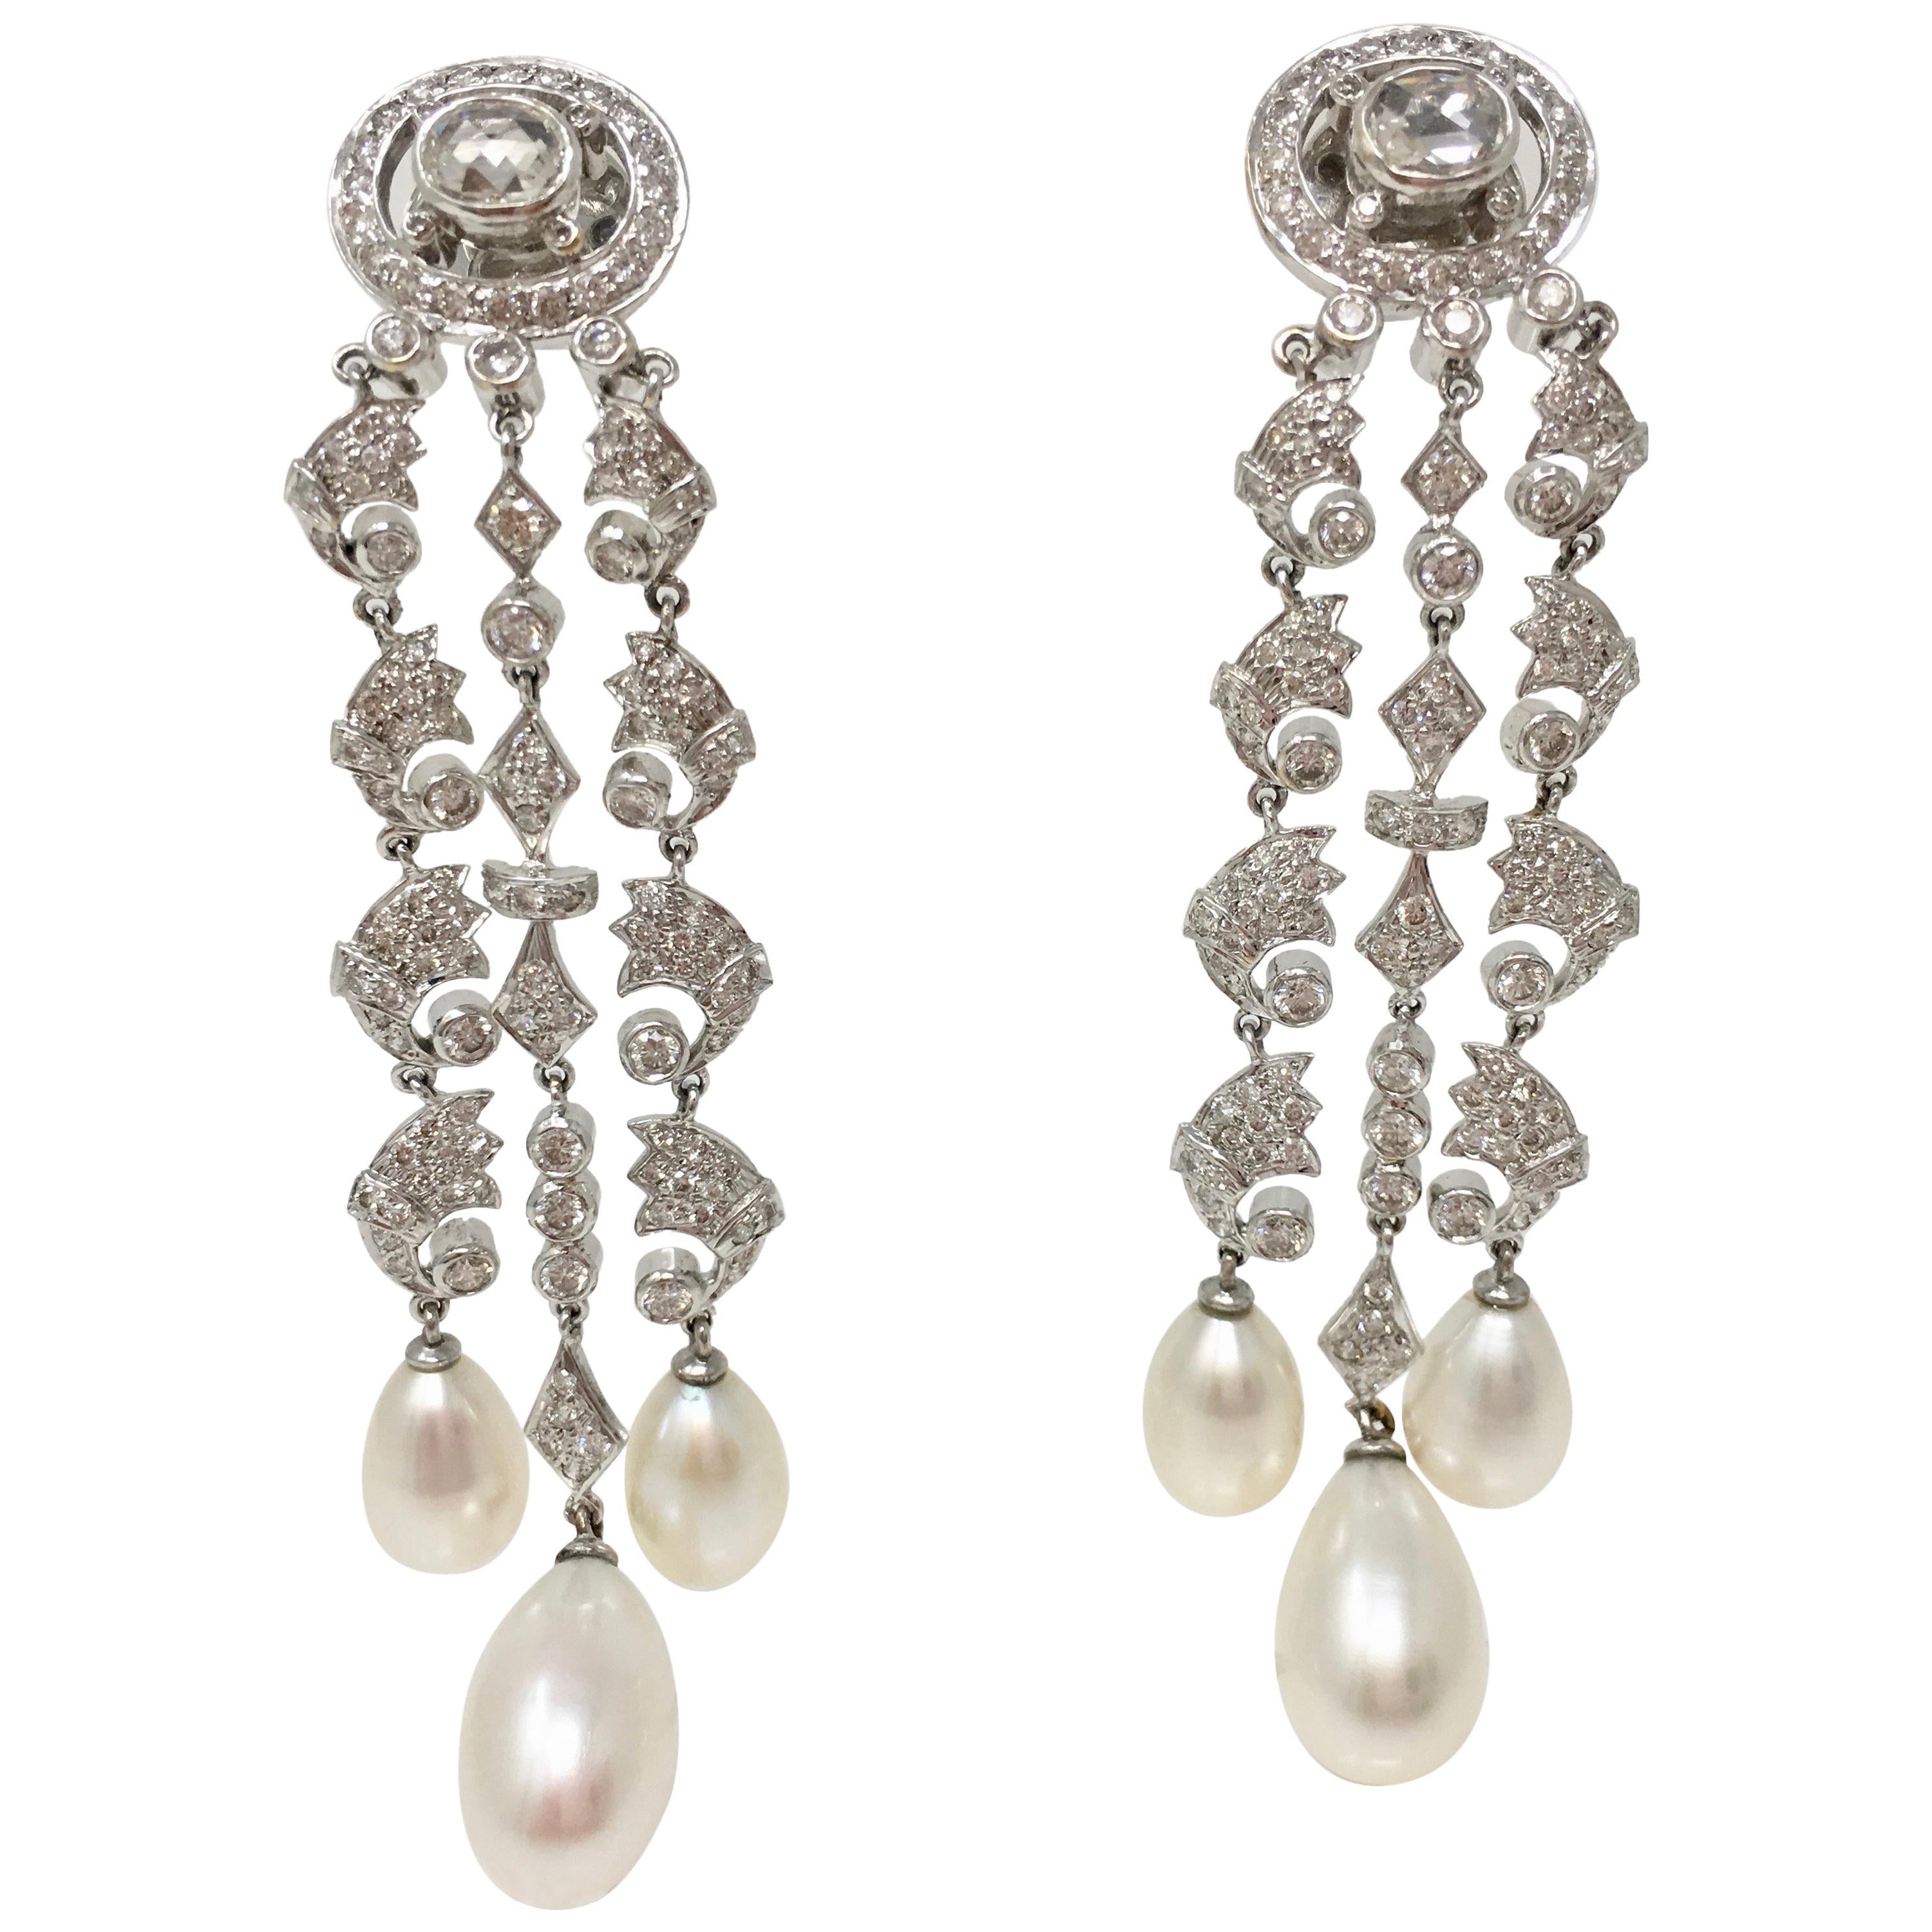 White Round Brilliant Diamond And White South Sea Pearl Earrings In 18k Gold. 